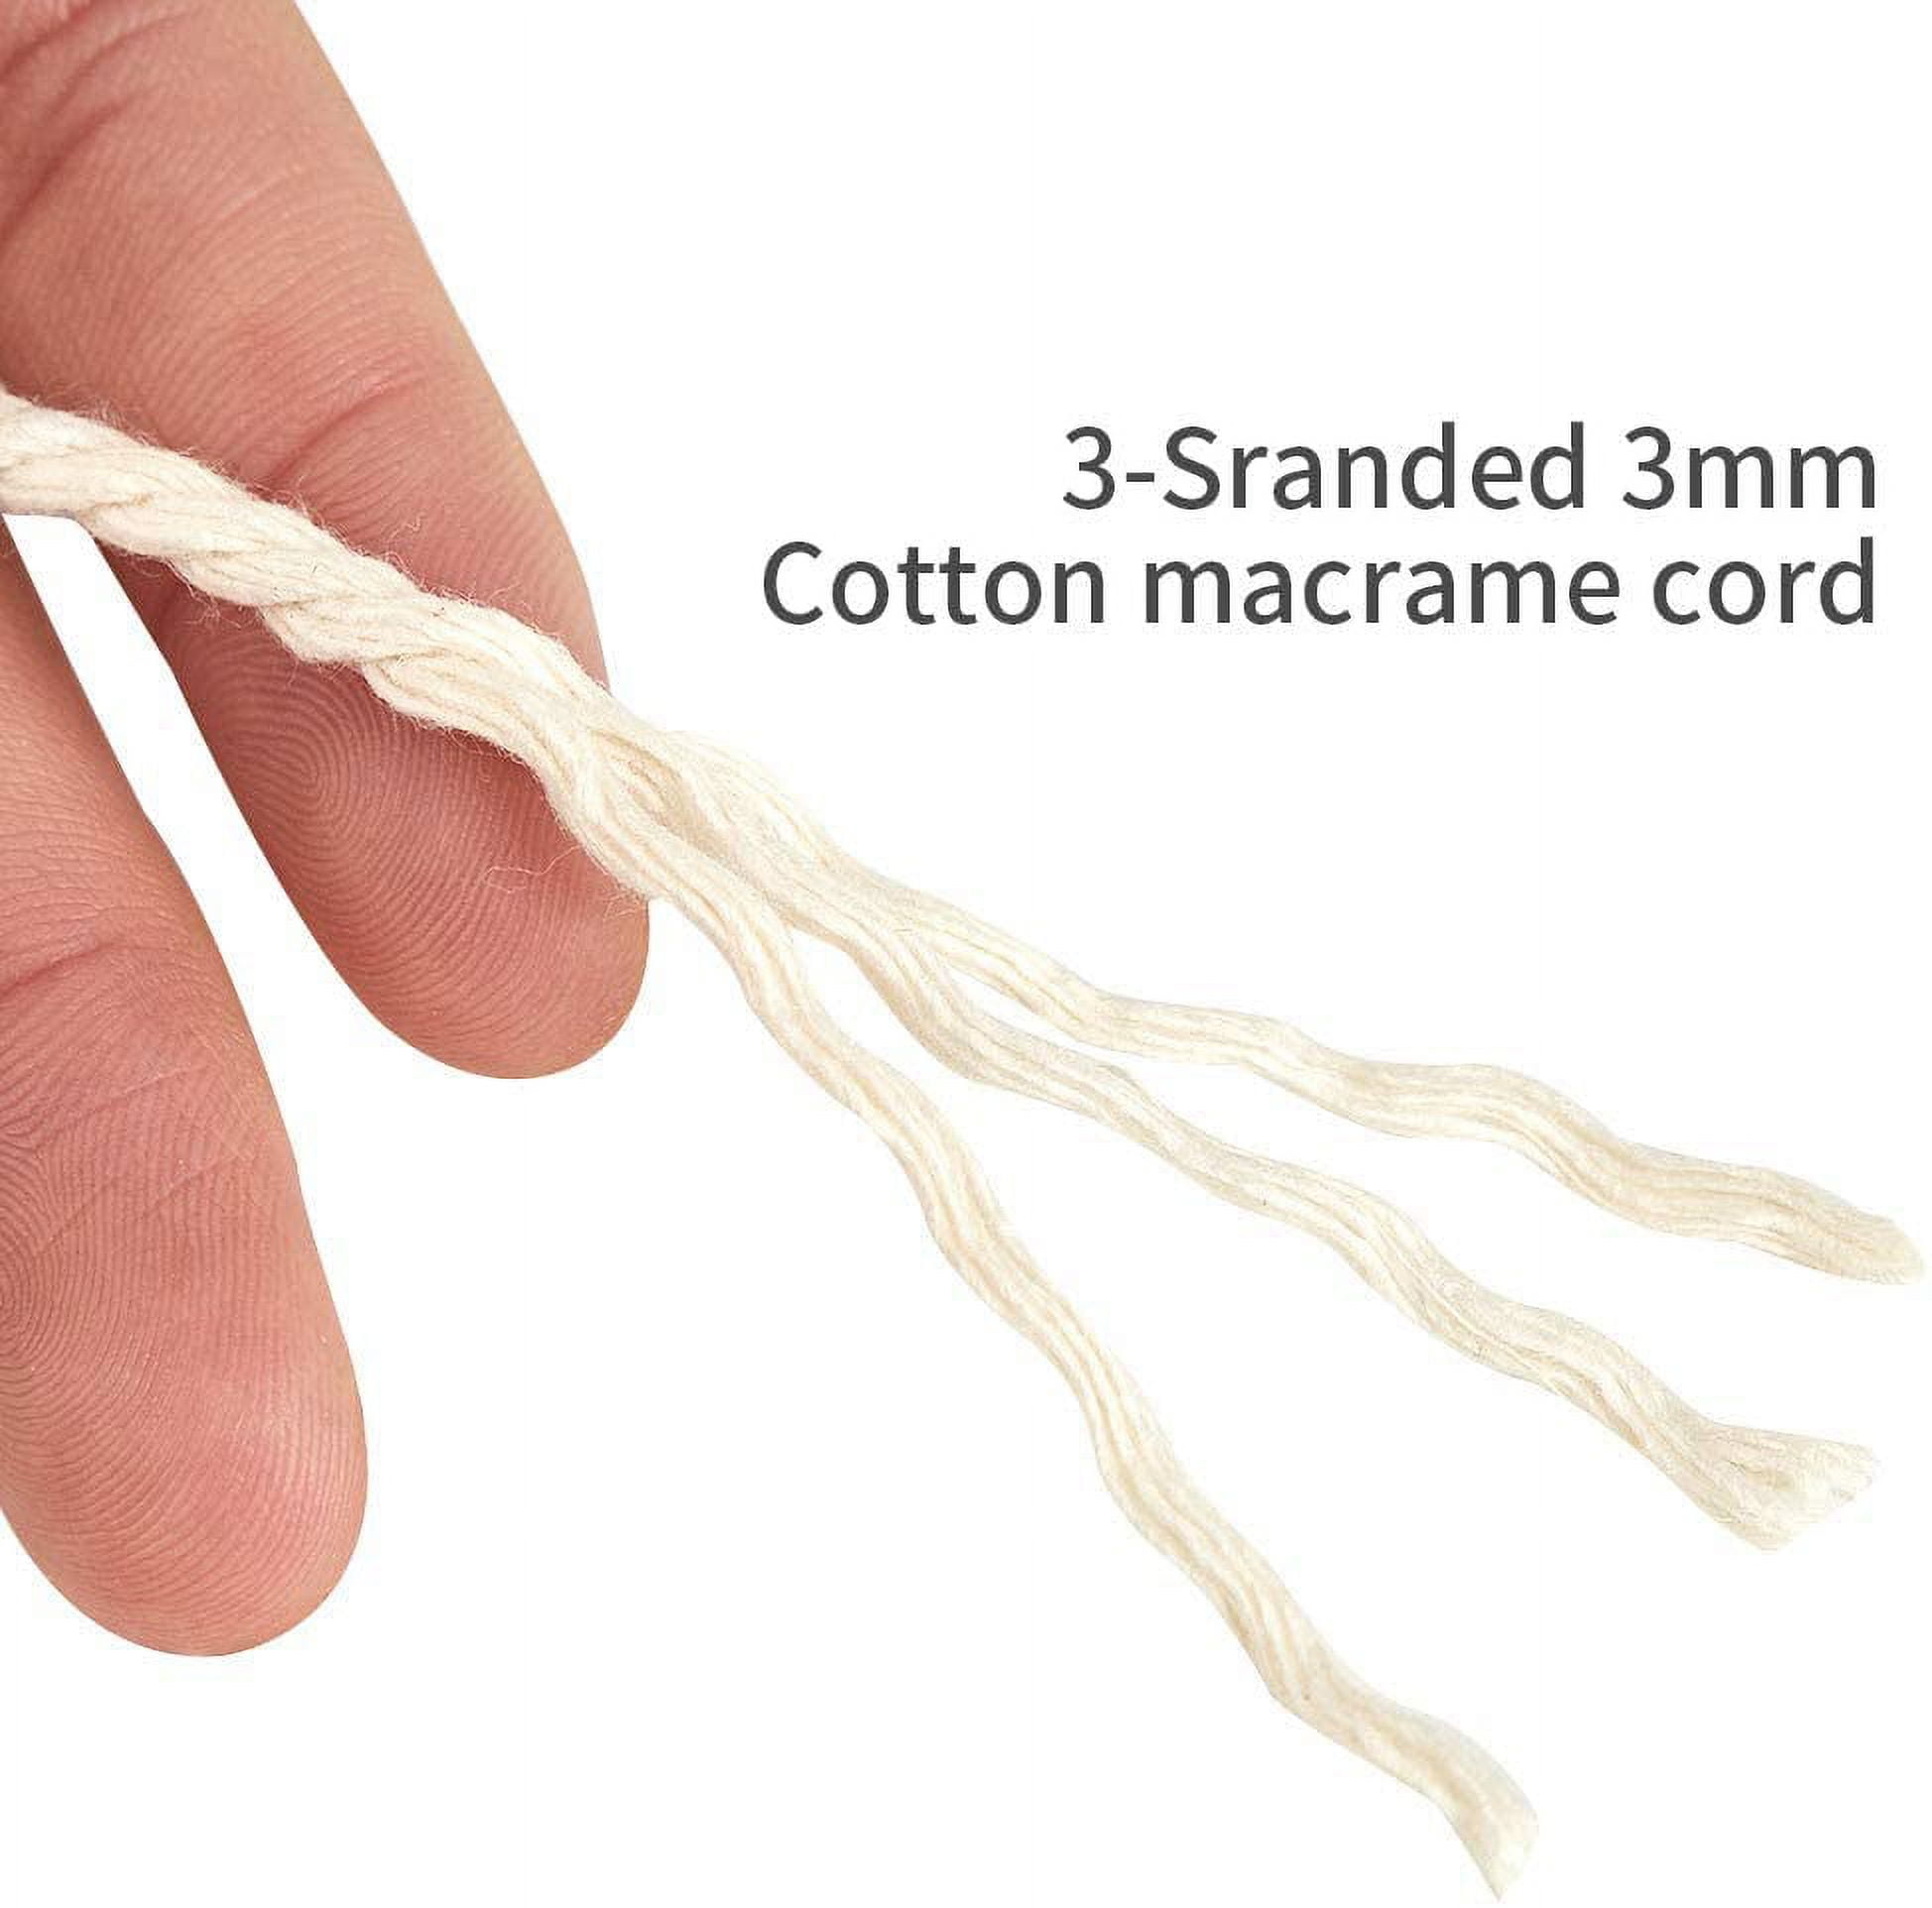 Macrame Cord Cotton Rope Macrame Supplies 3 Ply Twisted Macrame Rope String  Yarn for Plant Hanger Wall Hanging Knitting Wedding Décor by Mandala Crafts  Natural 3mm 109 Yards 